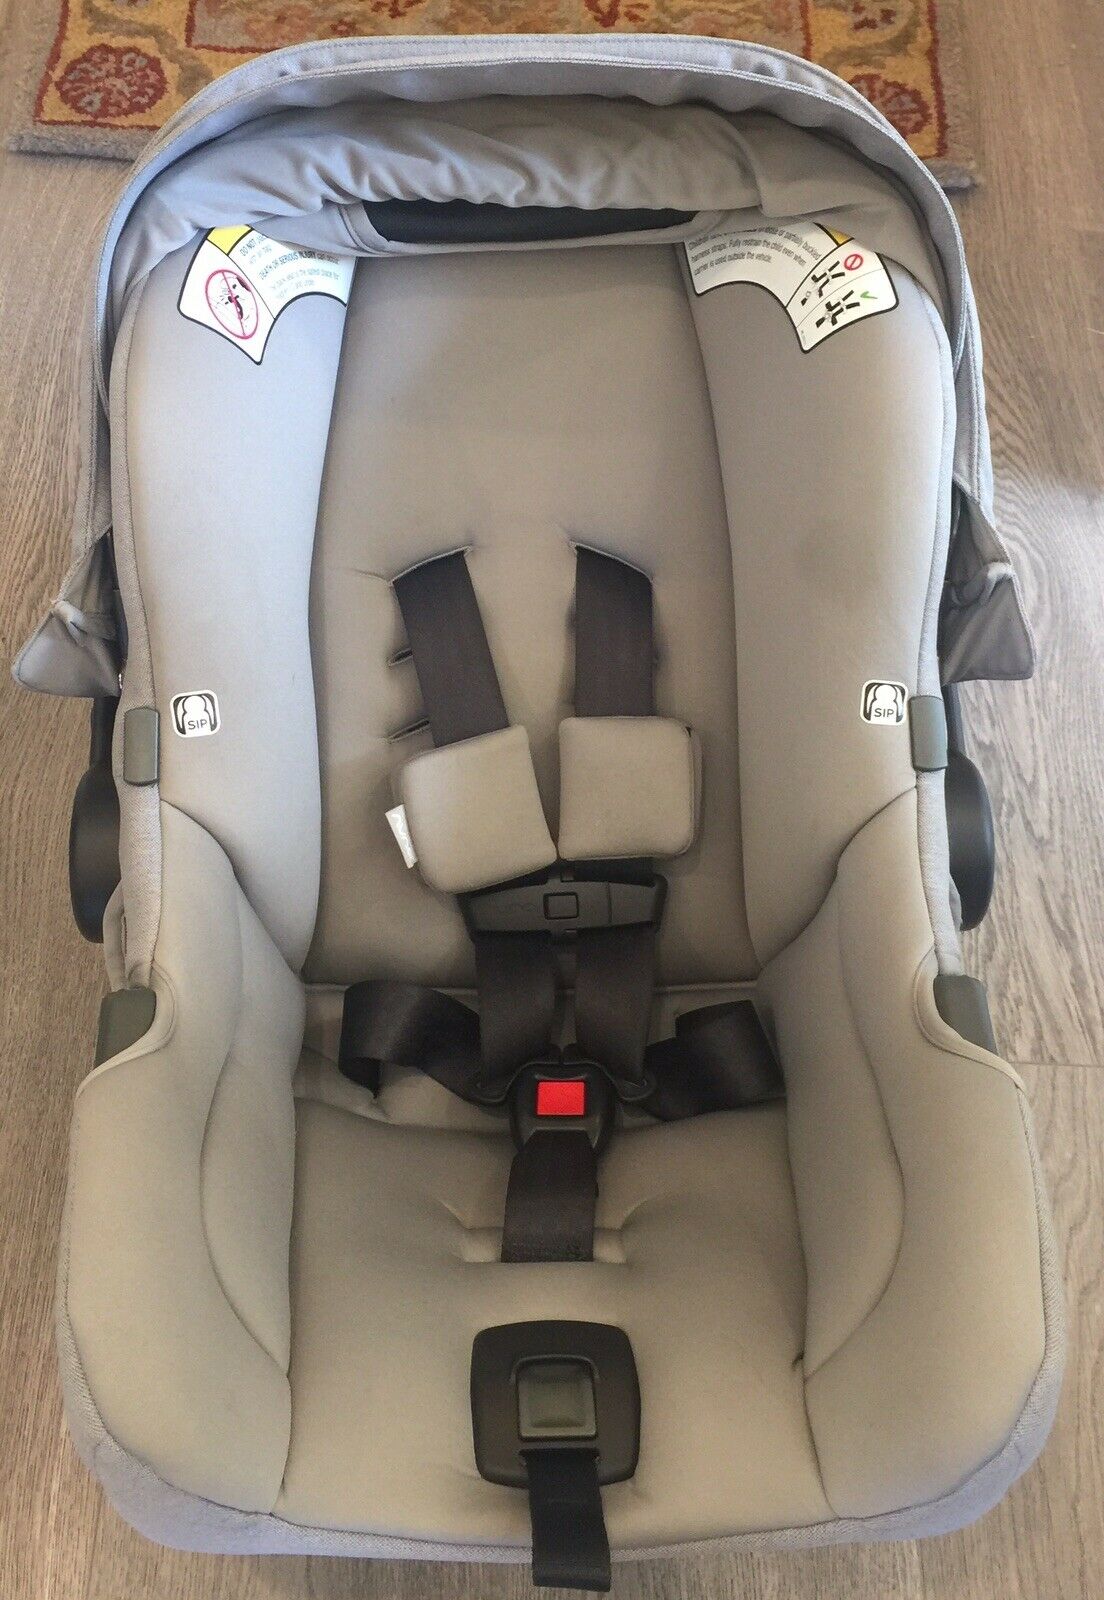 Nuna Pipa 2019 Infant Car Seat ***mint Condtion*** Pre-owned